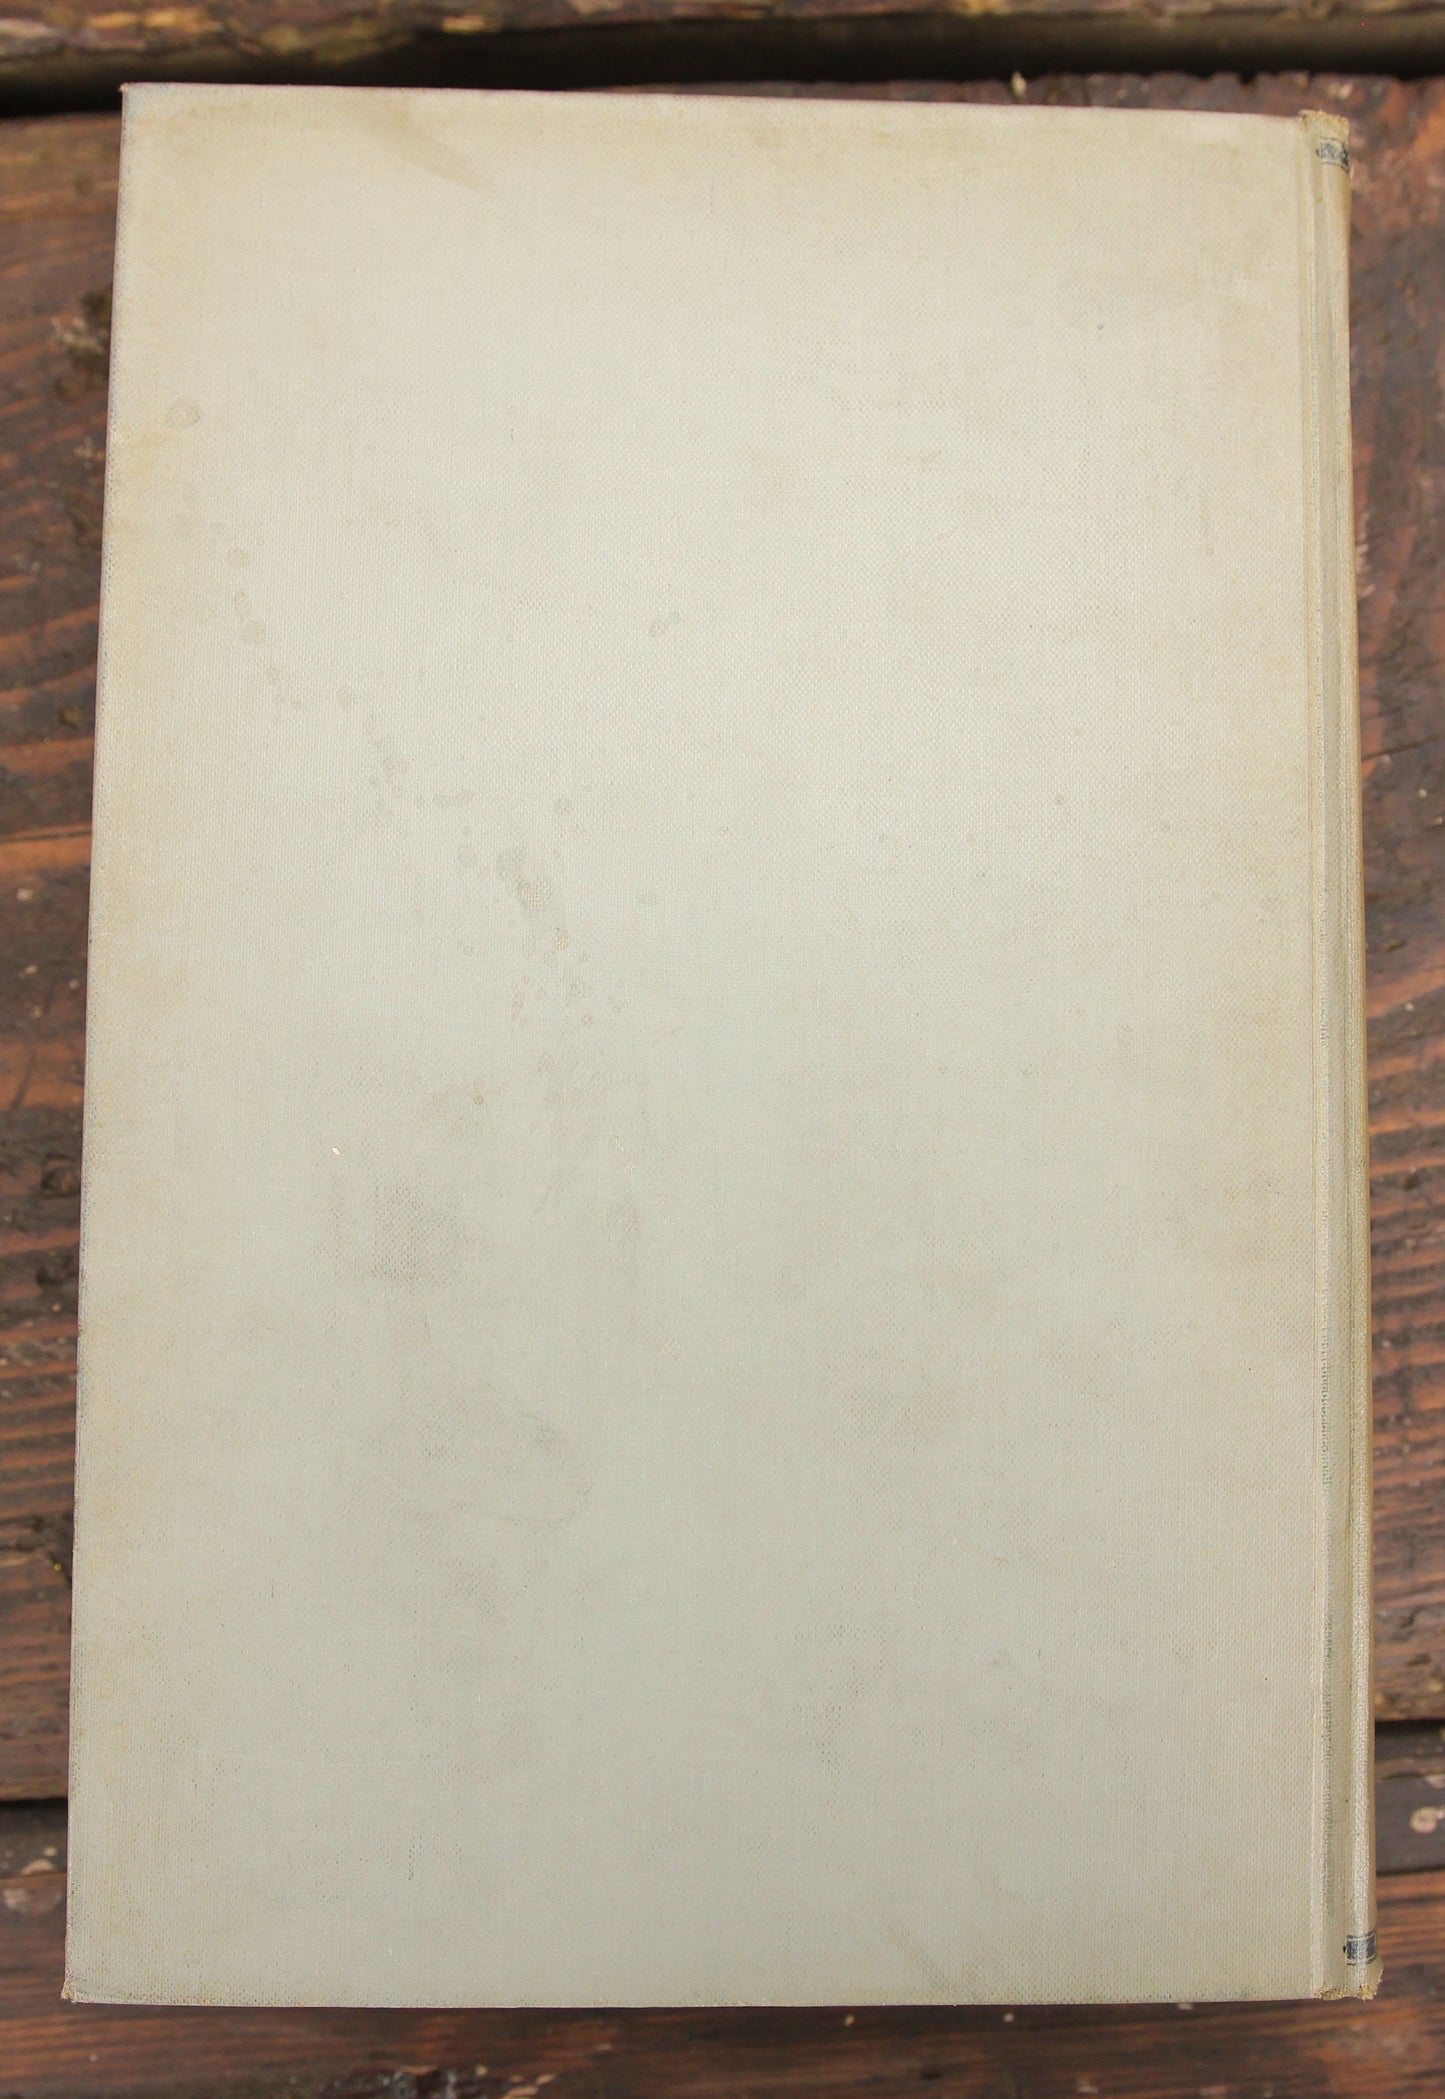 The Confederate Privateers by William Morrison Robinson, Jr., Copyright 1928